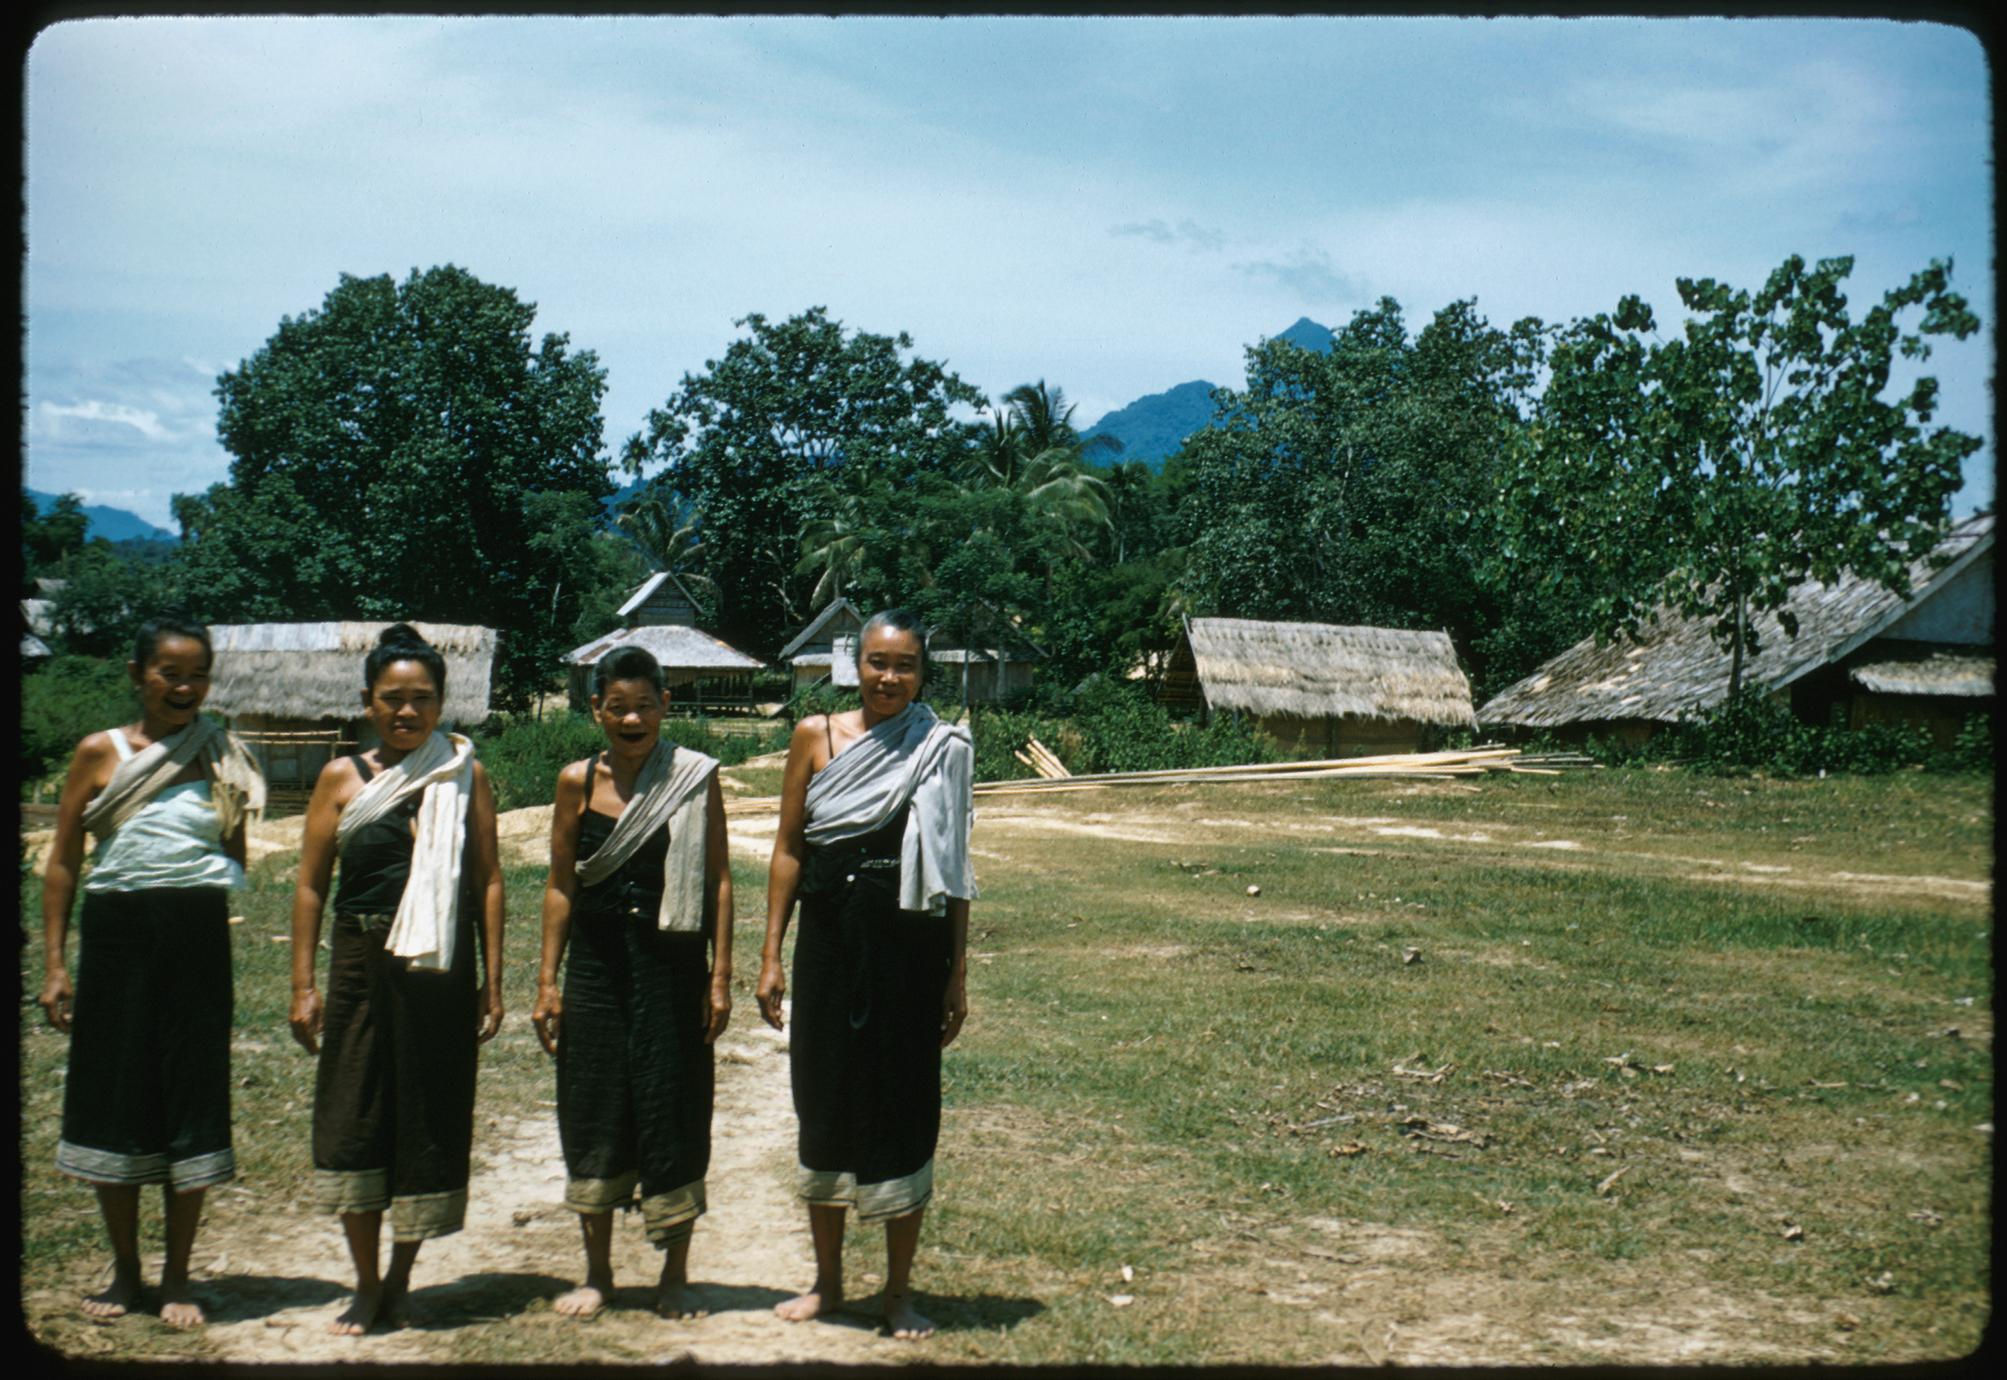 Older Lao women with sashes, barefoot, near Muang Kasy